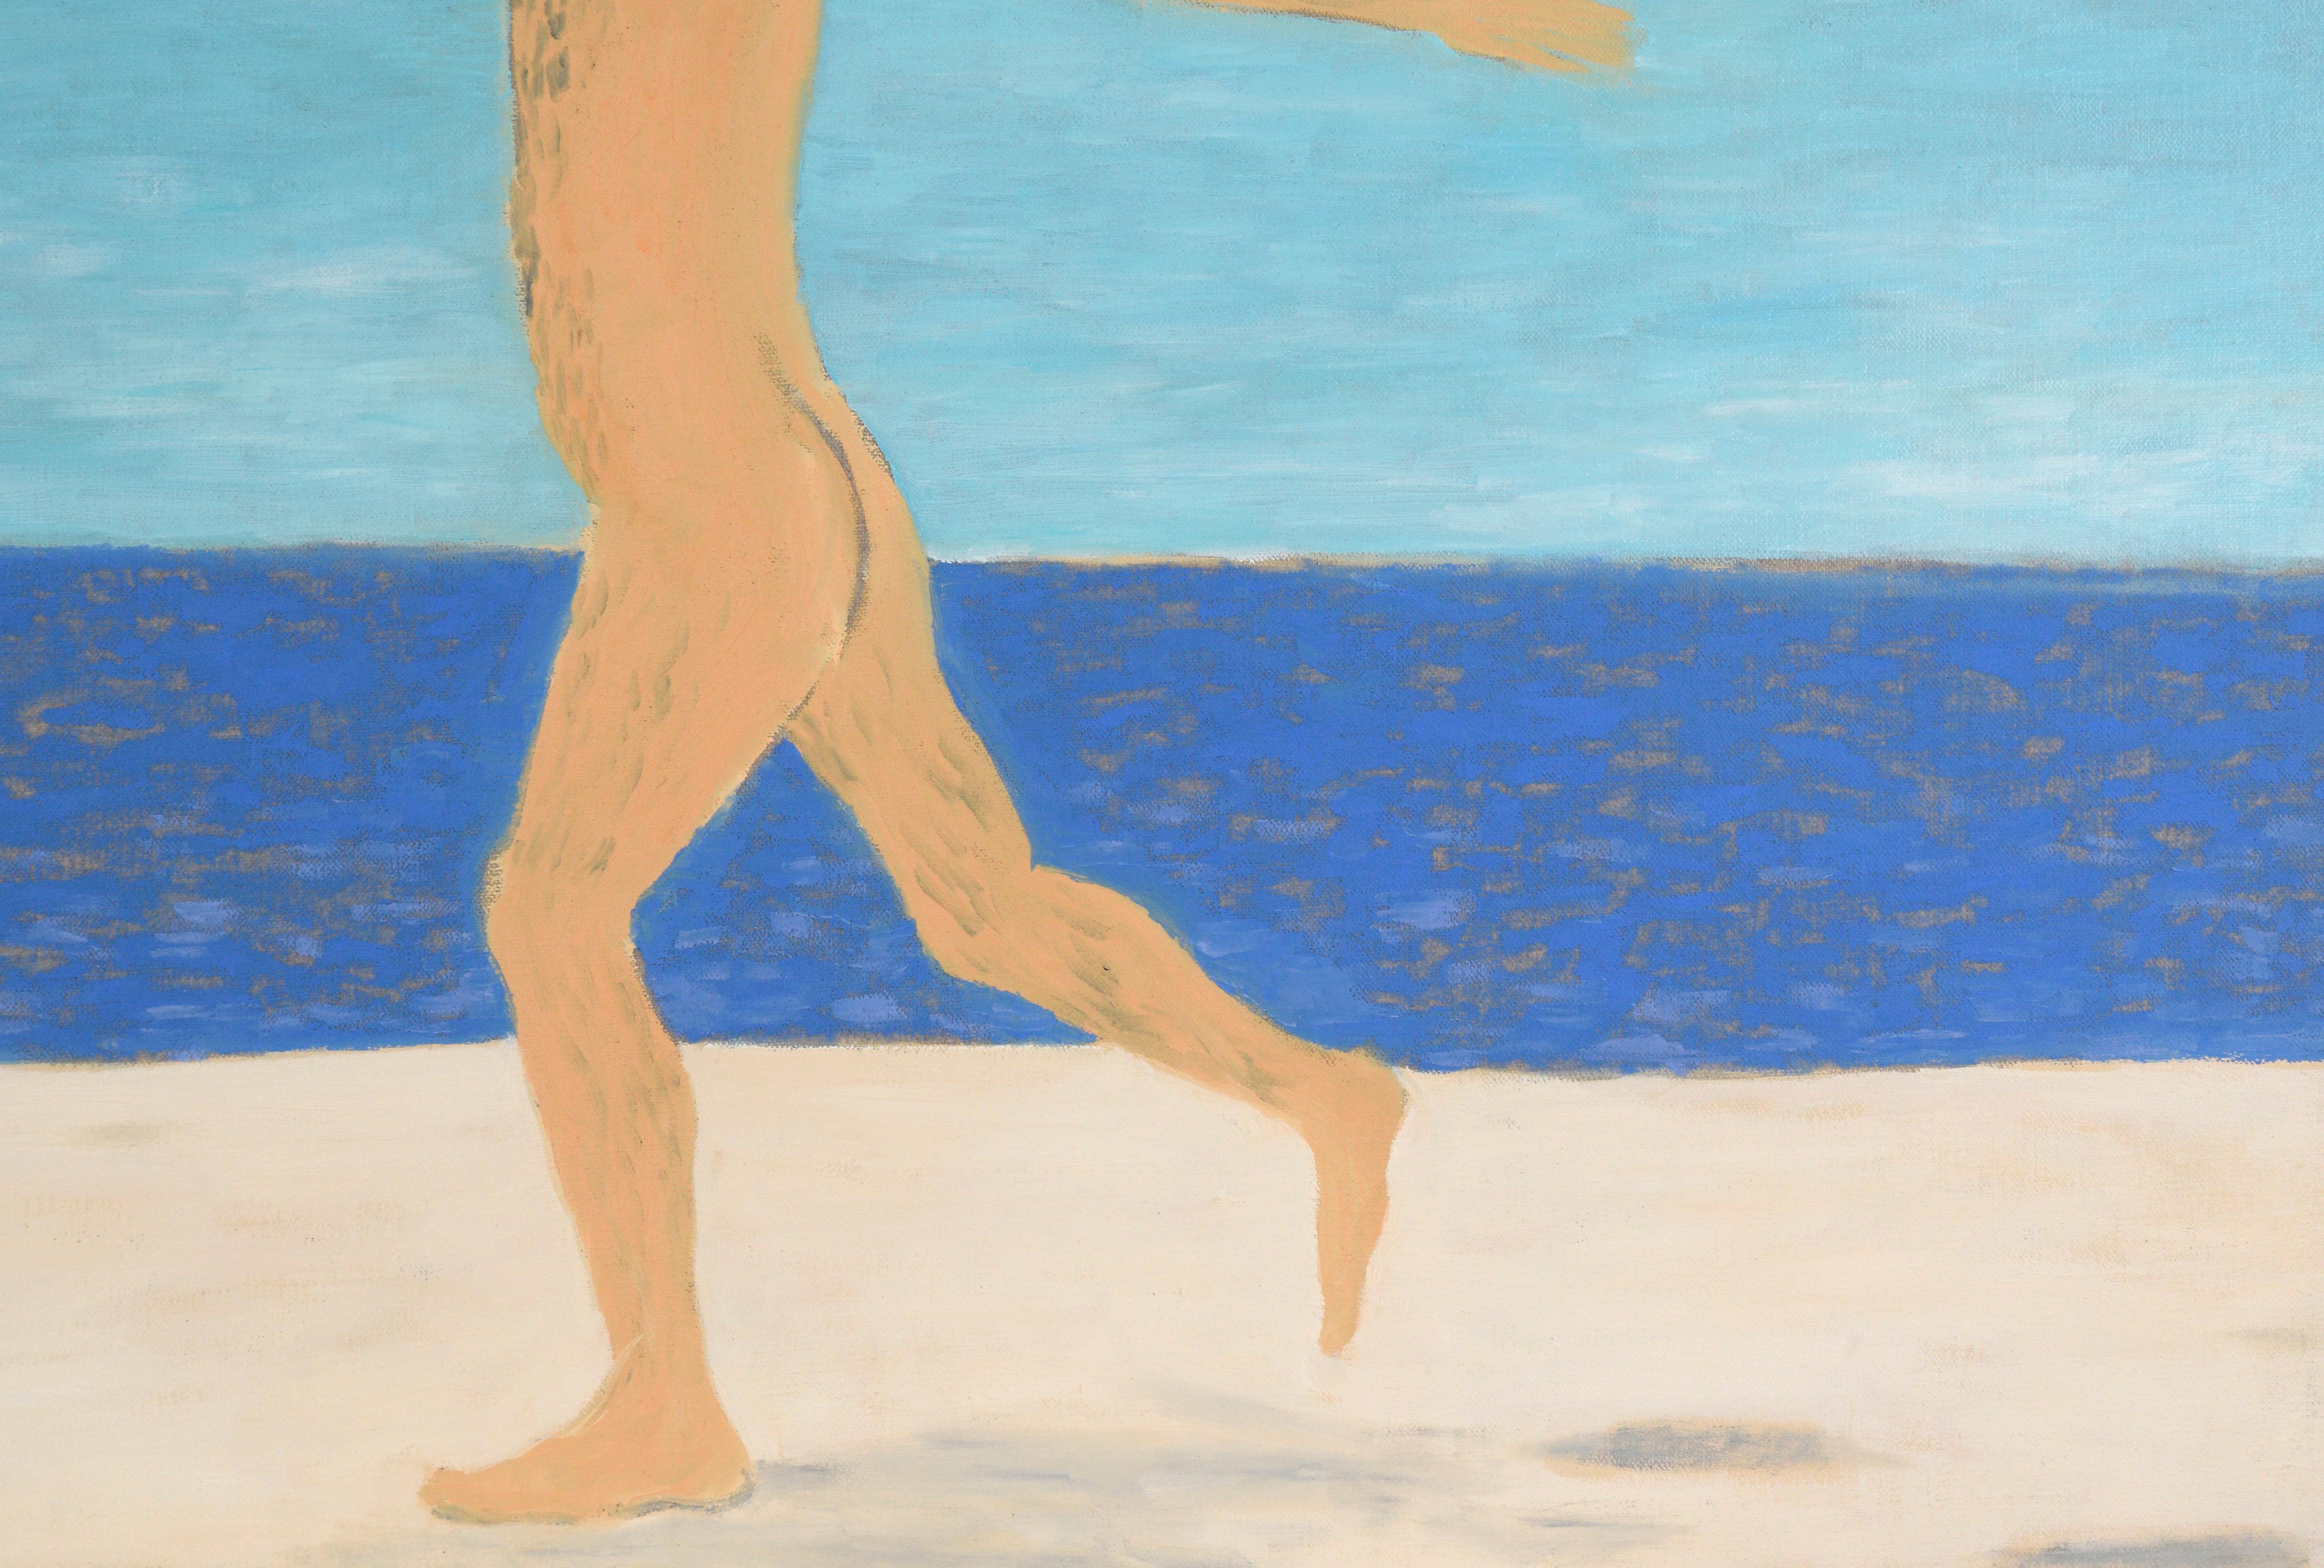 Artist's Dream VI - Frolicking on the Beach, Surreal Self-Portrait - Contemporary Painting by Michael Pauker 